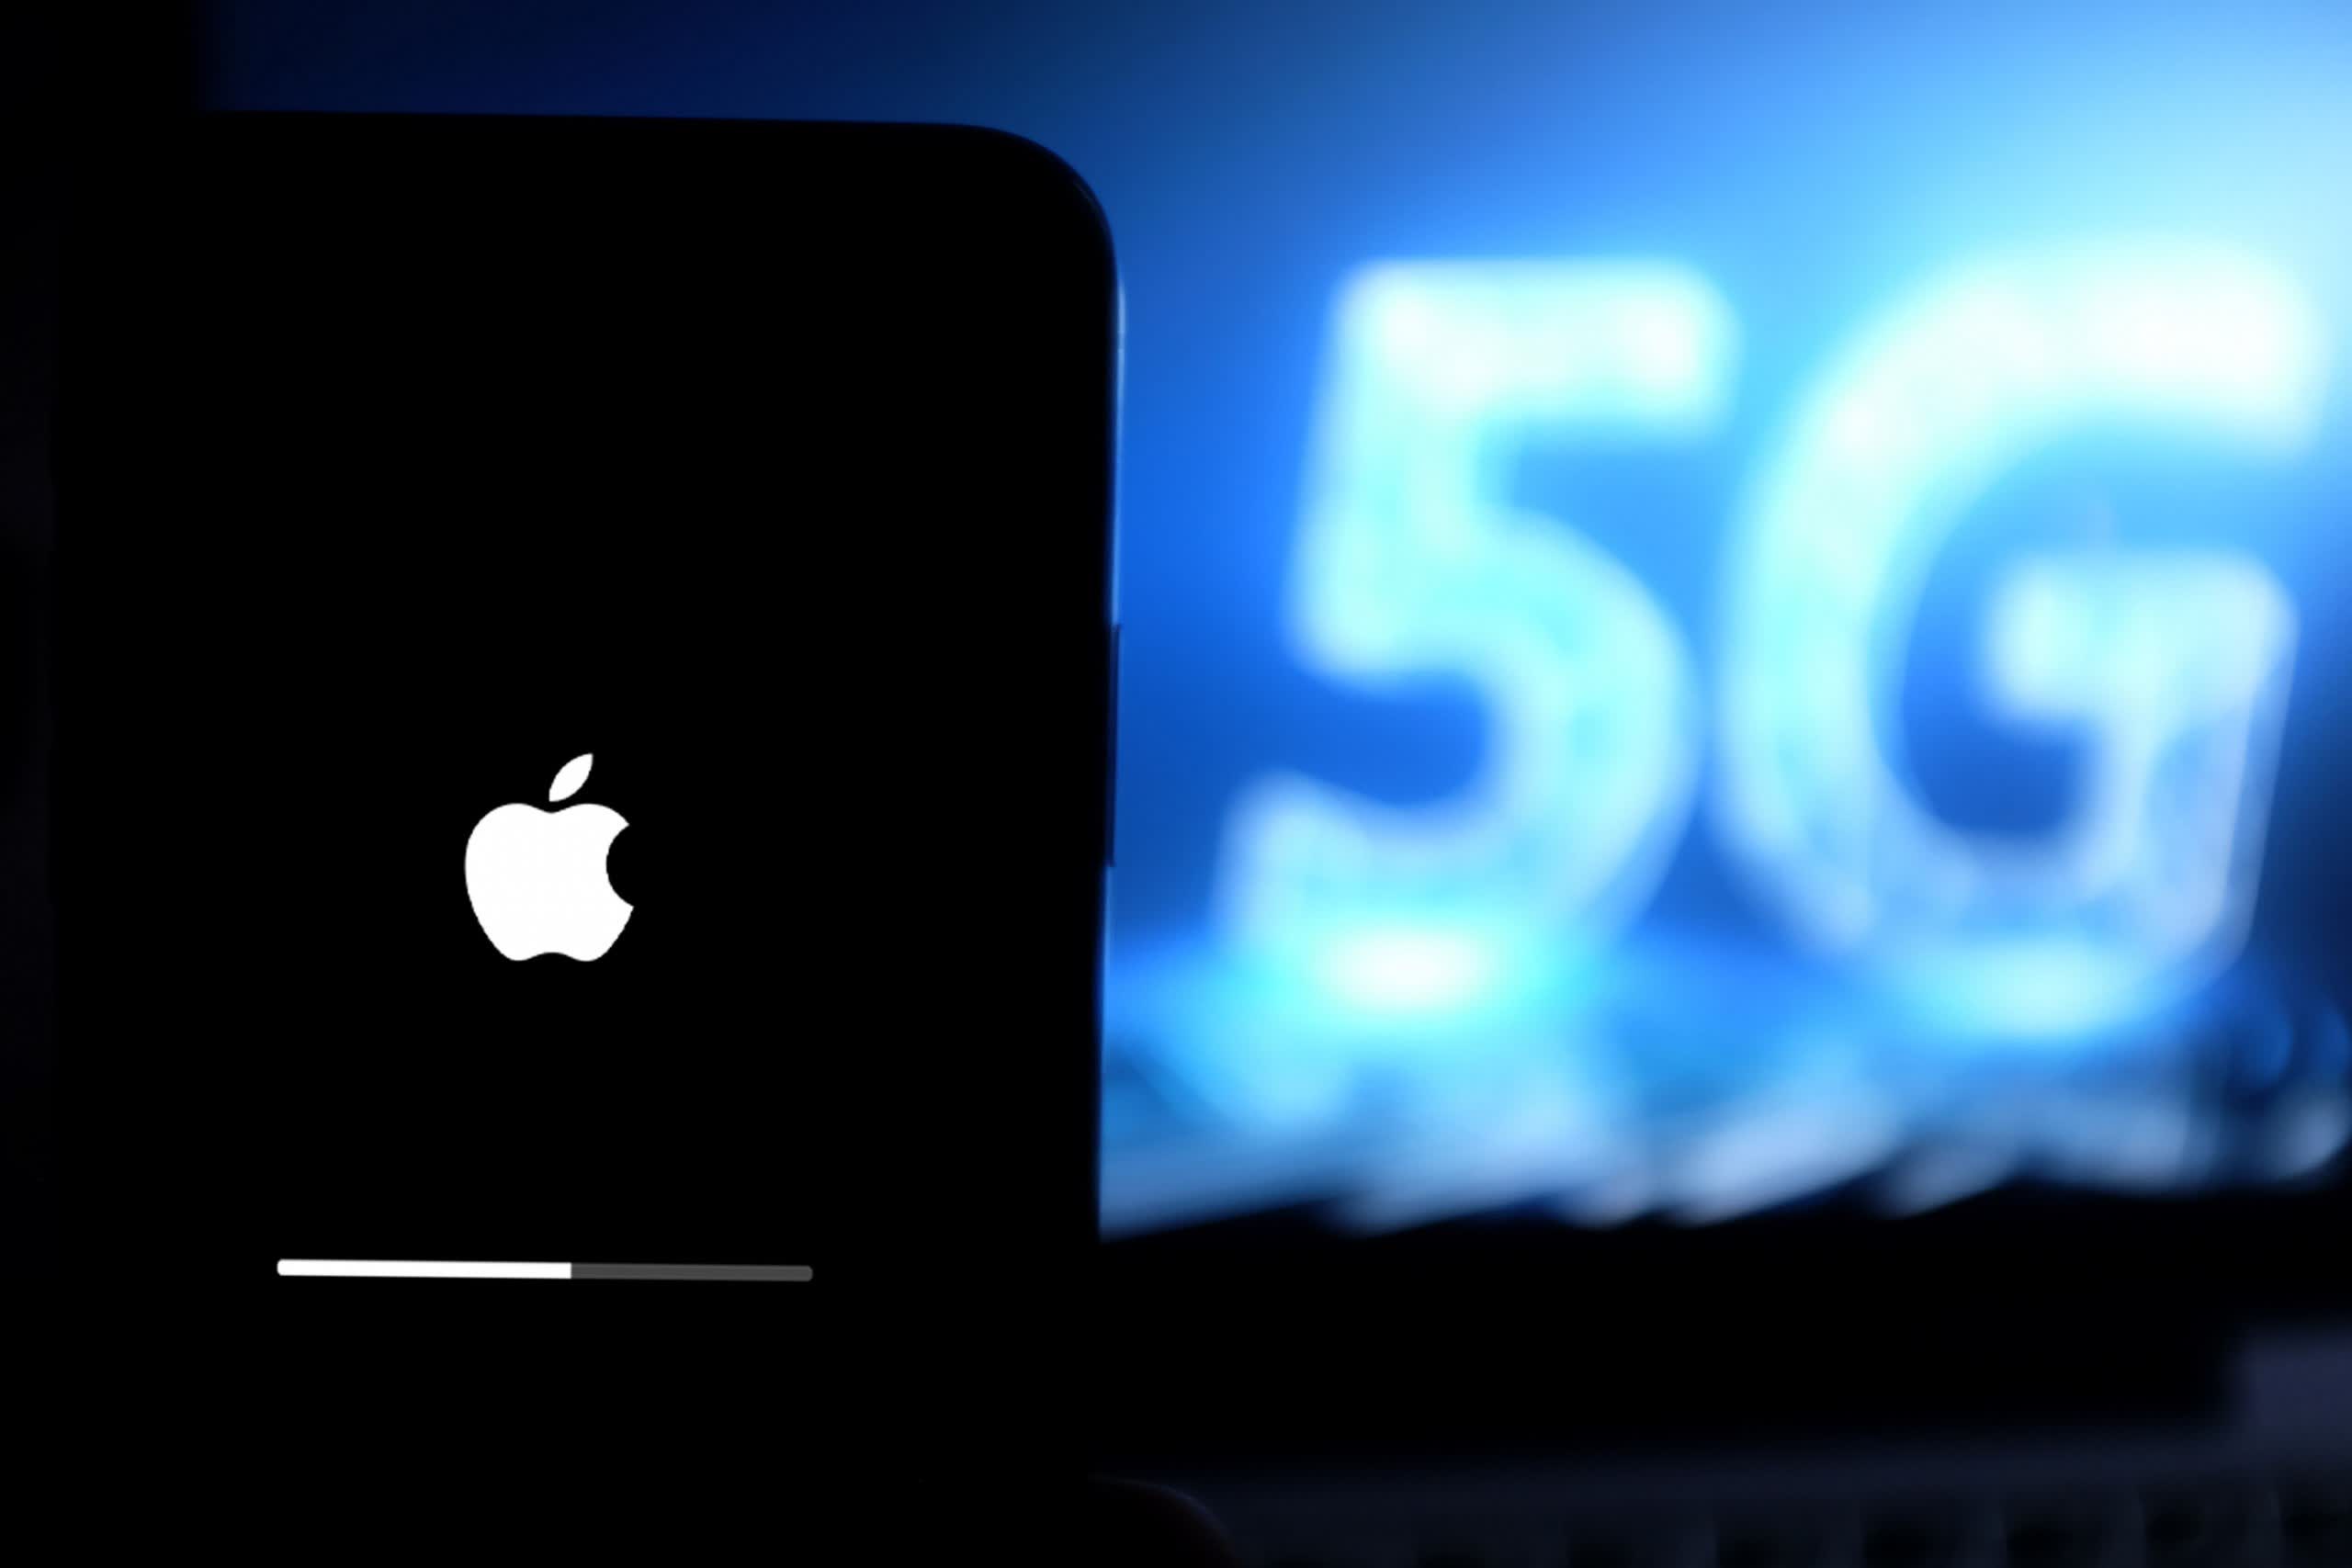 Apple's in-house custom 5G modems might arrive in 2023 iPhones